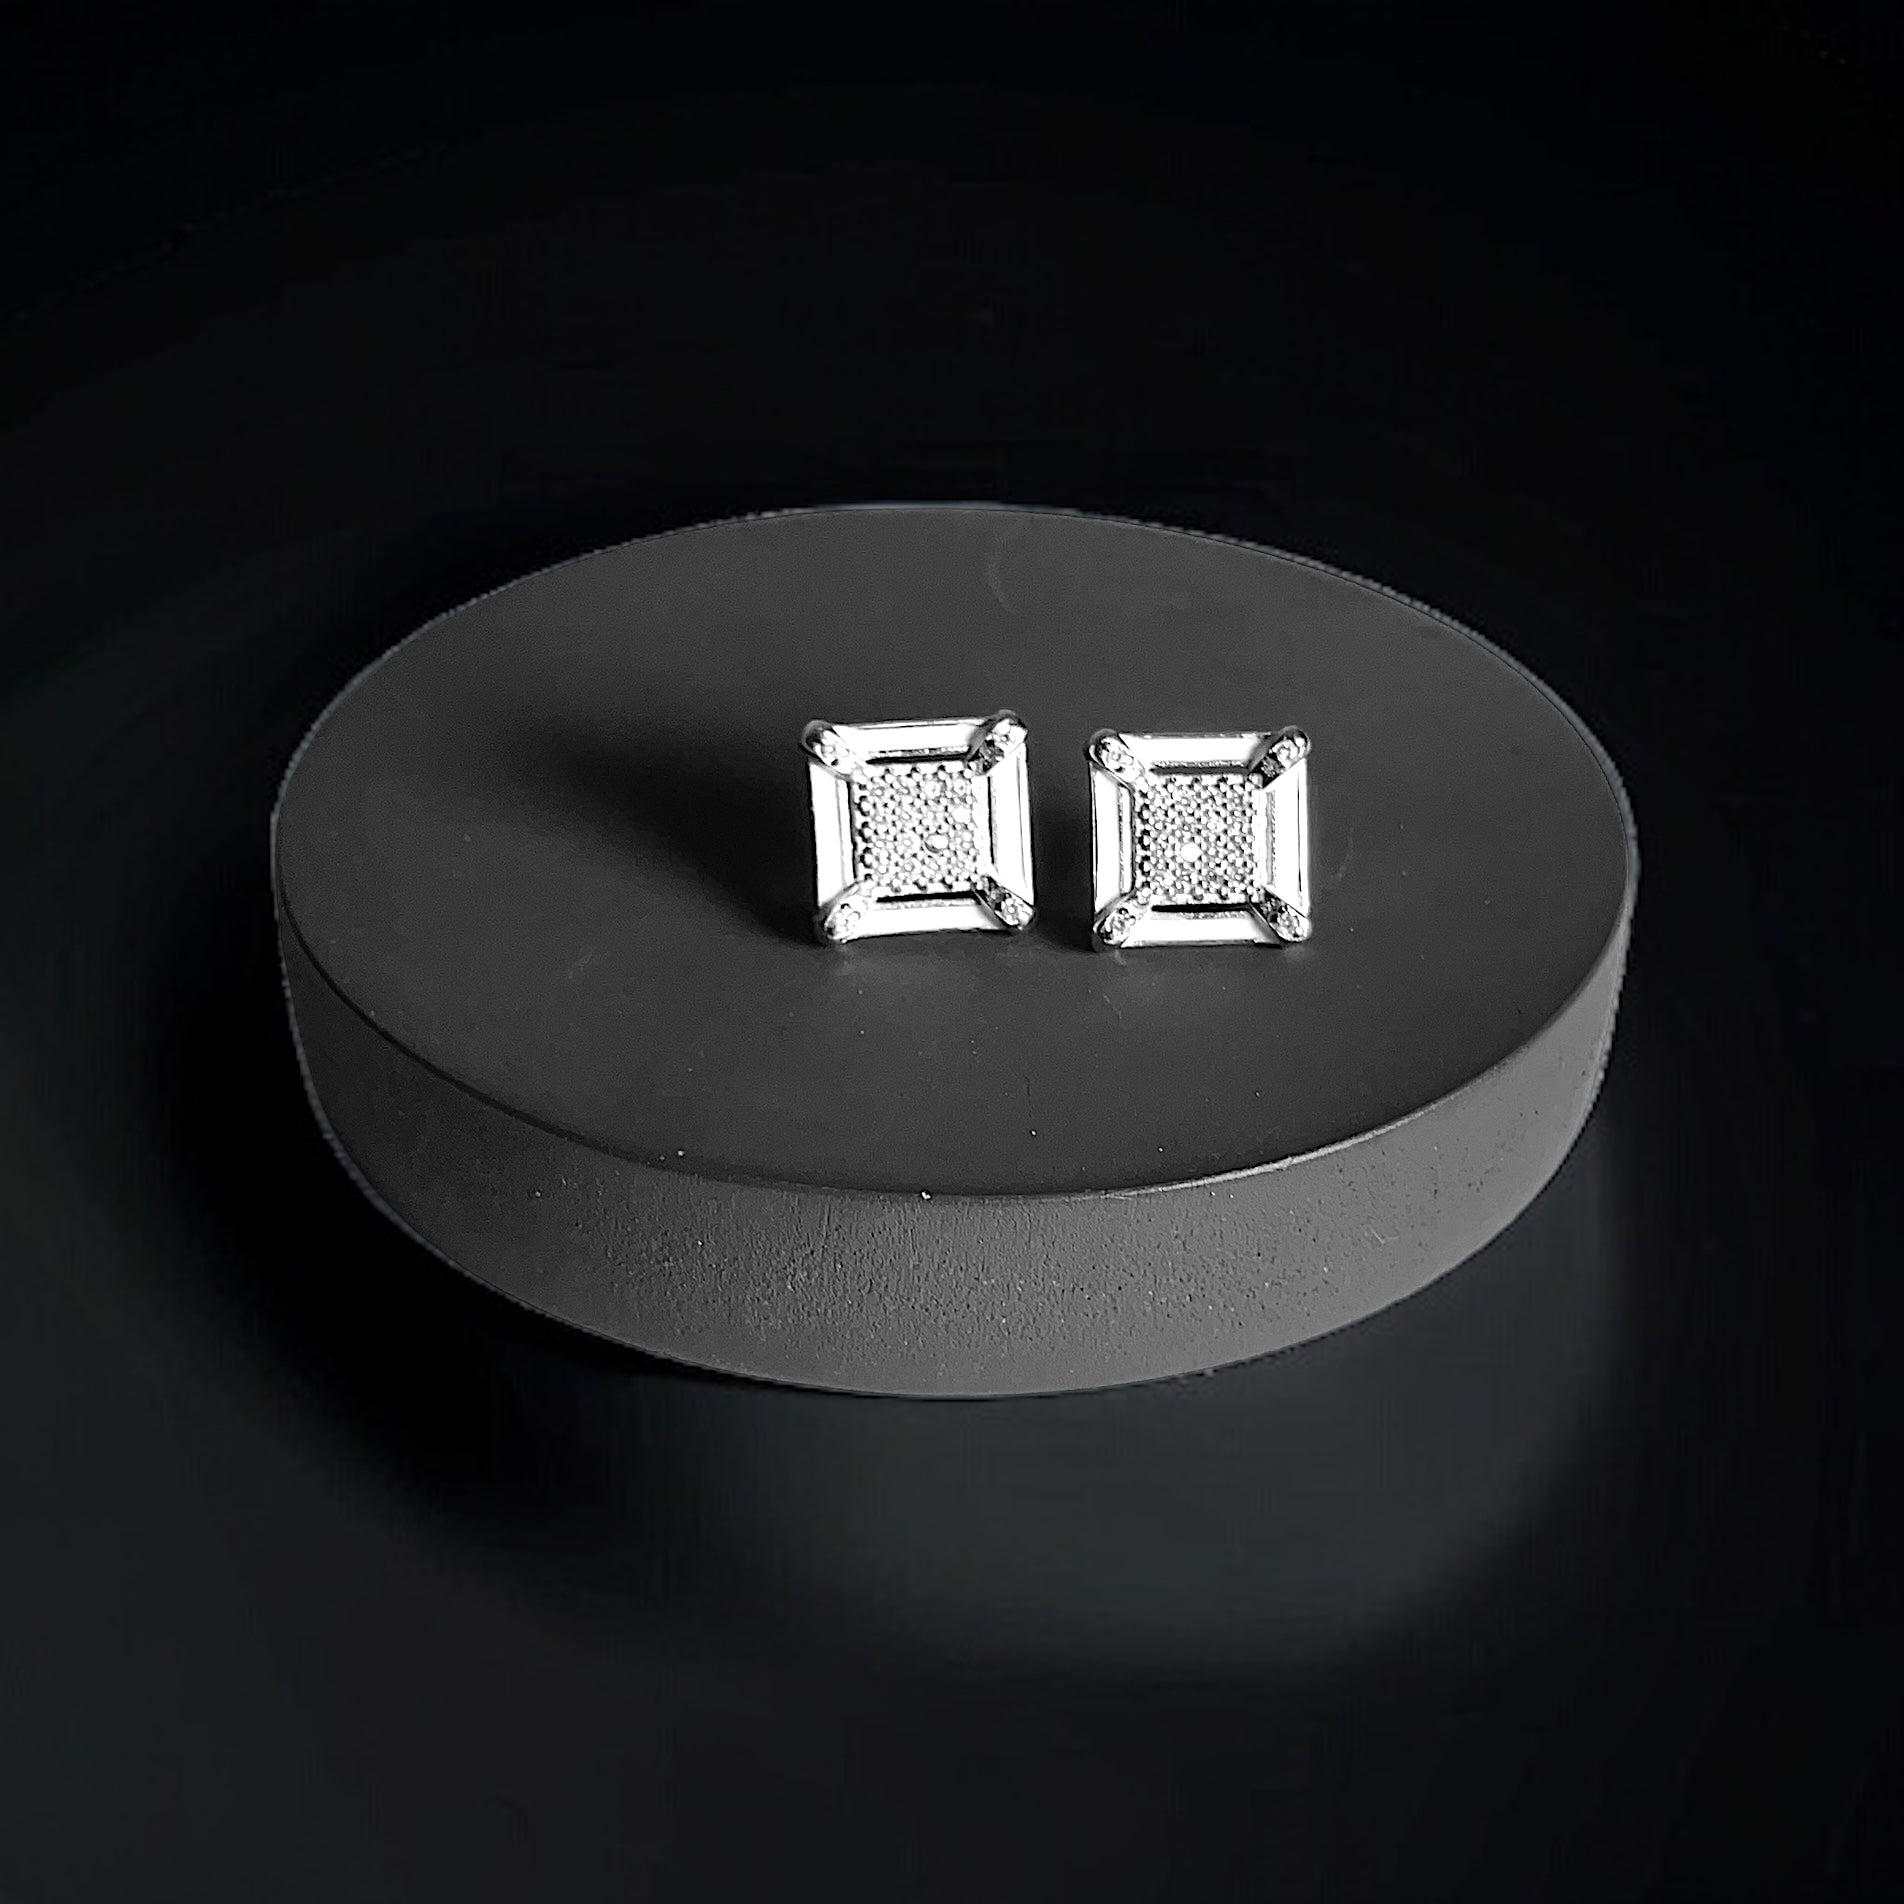 a pair of diamond earrings sitting on top of a black surface